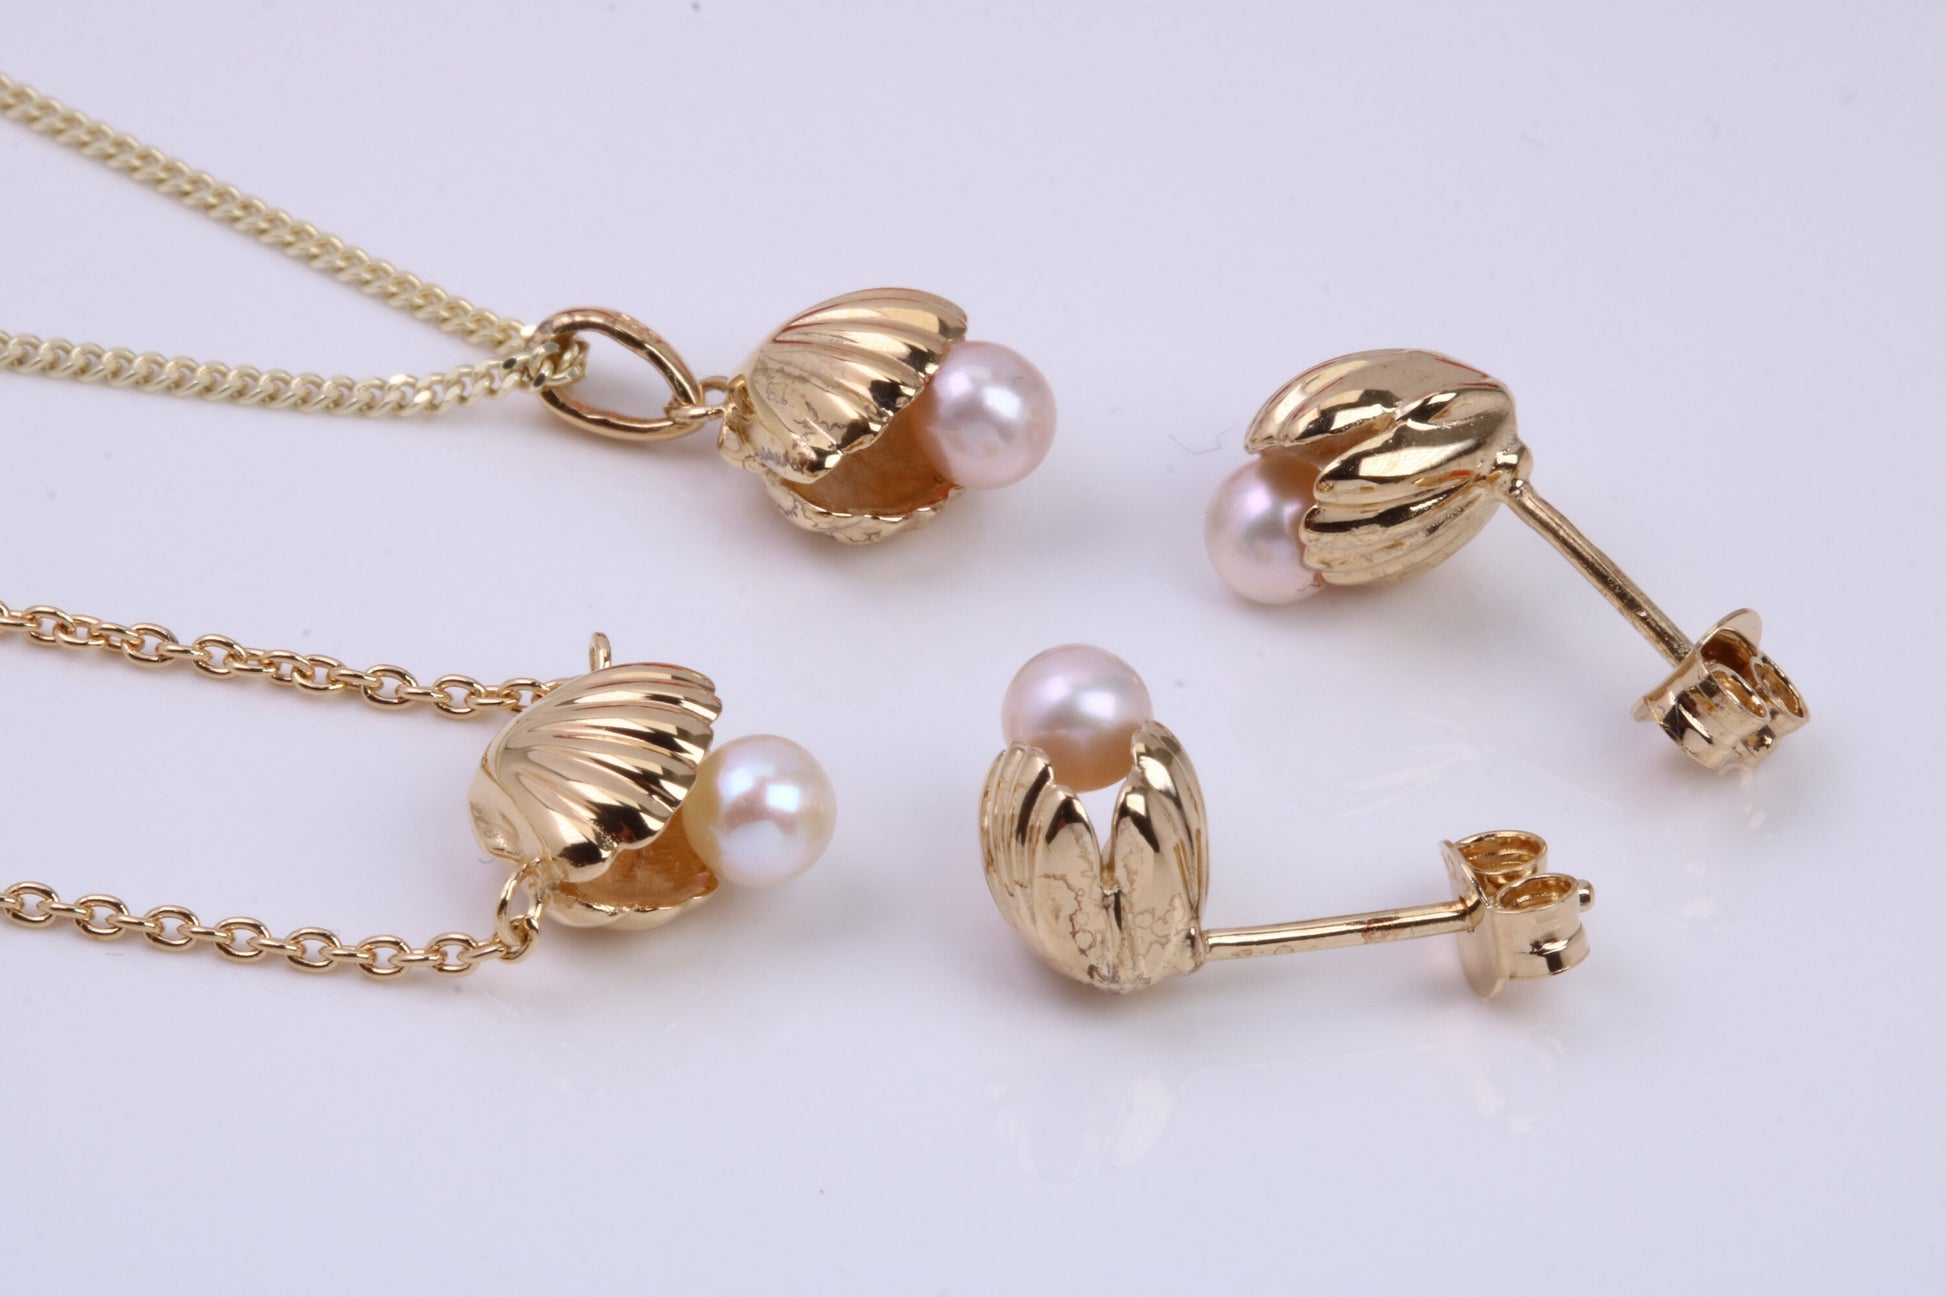 Pearl set Shell Necklace and Earrings with Matching Bracelet, Made from solid Sterling Silver, 18ct Yellow Gold Plated